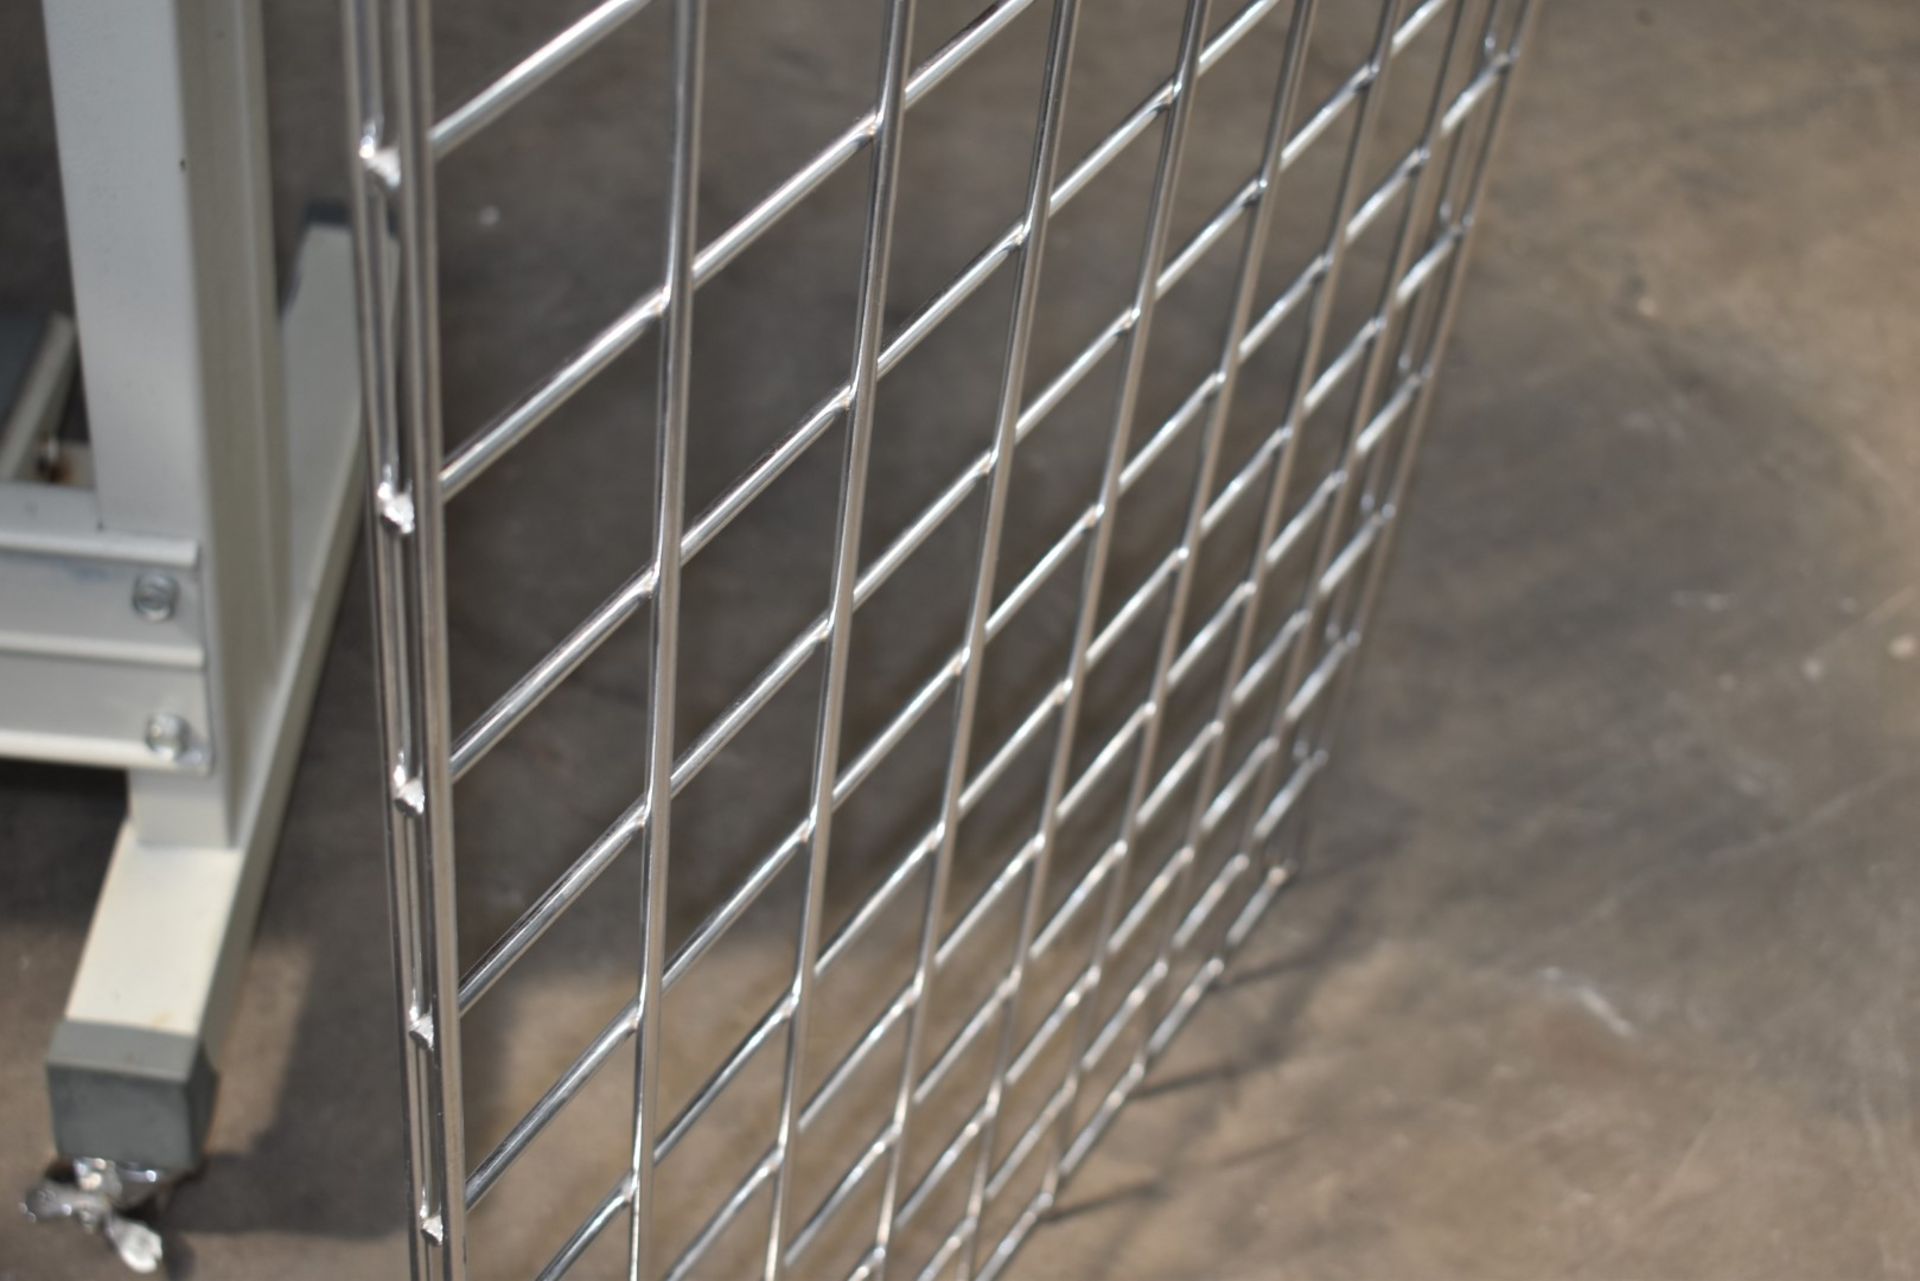 6 x Gridwall Mesh Wall Panels - Heavy Metal Construction in Chrome - Ideal For Making Security Cages - Image 7 of 7